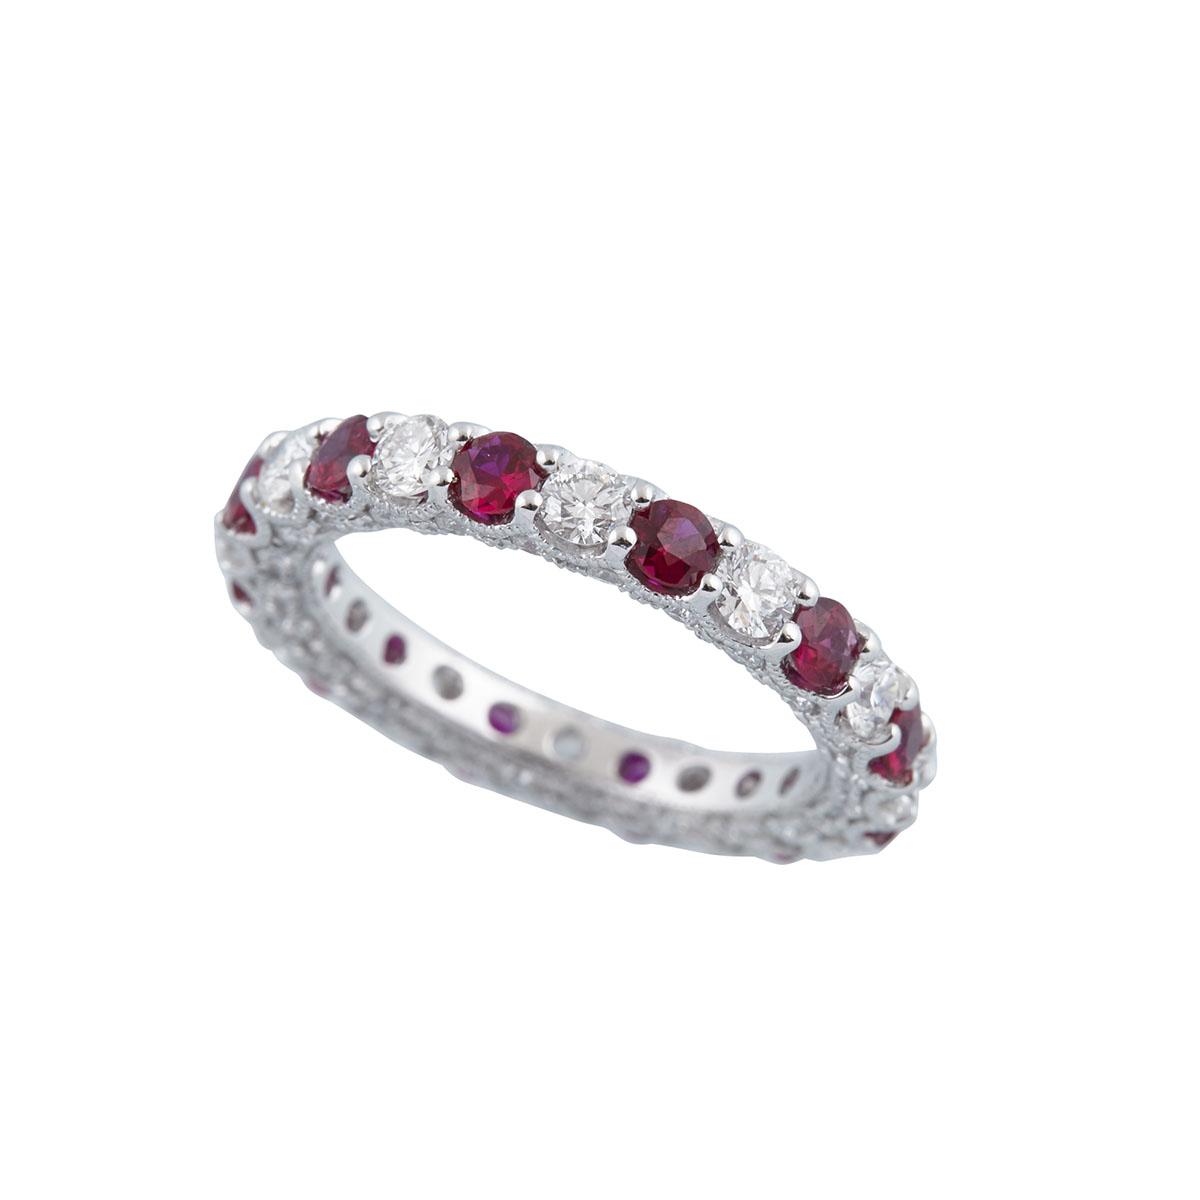 18K WHITE GOLD FILIGREE ETERNITY BANDset with 12 full cut rubies (approx. 1.13ct.t.w.), 12 brilliant